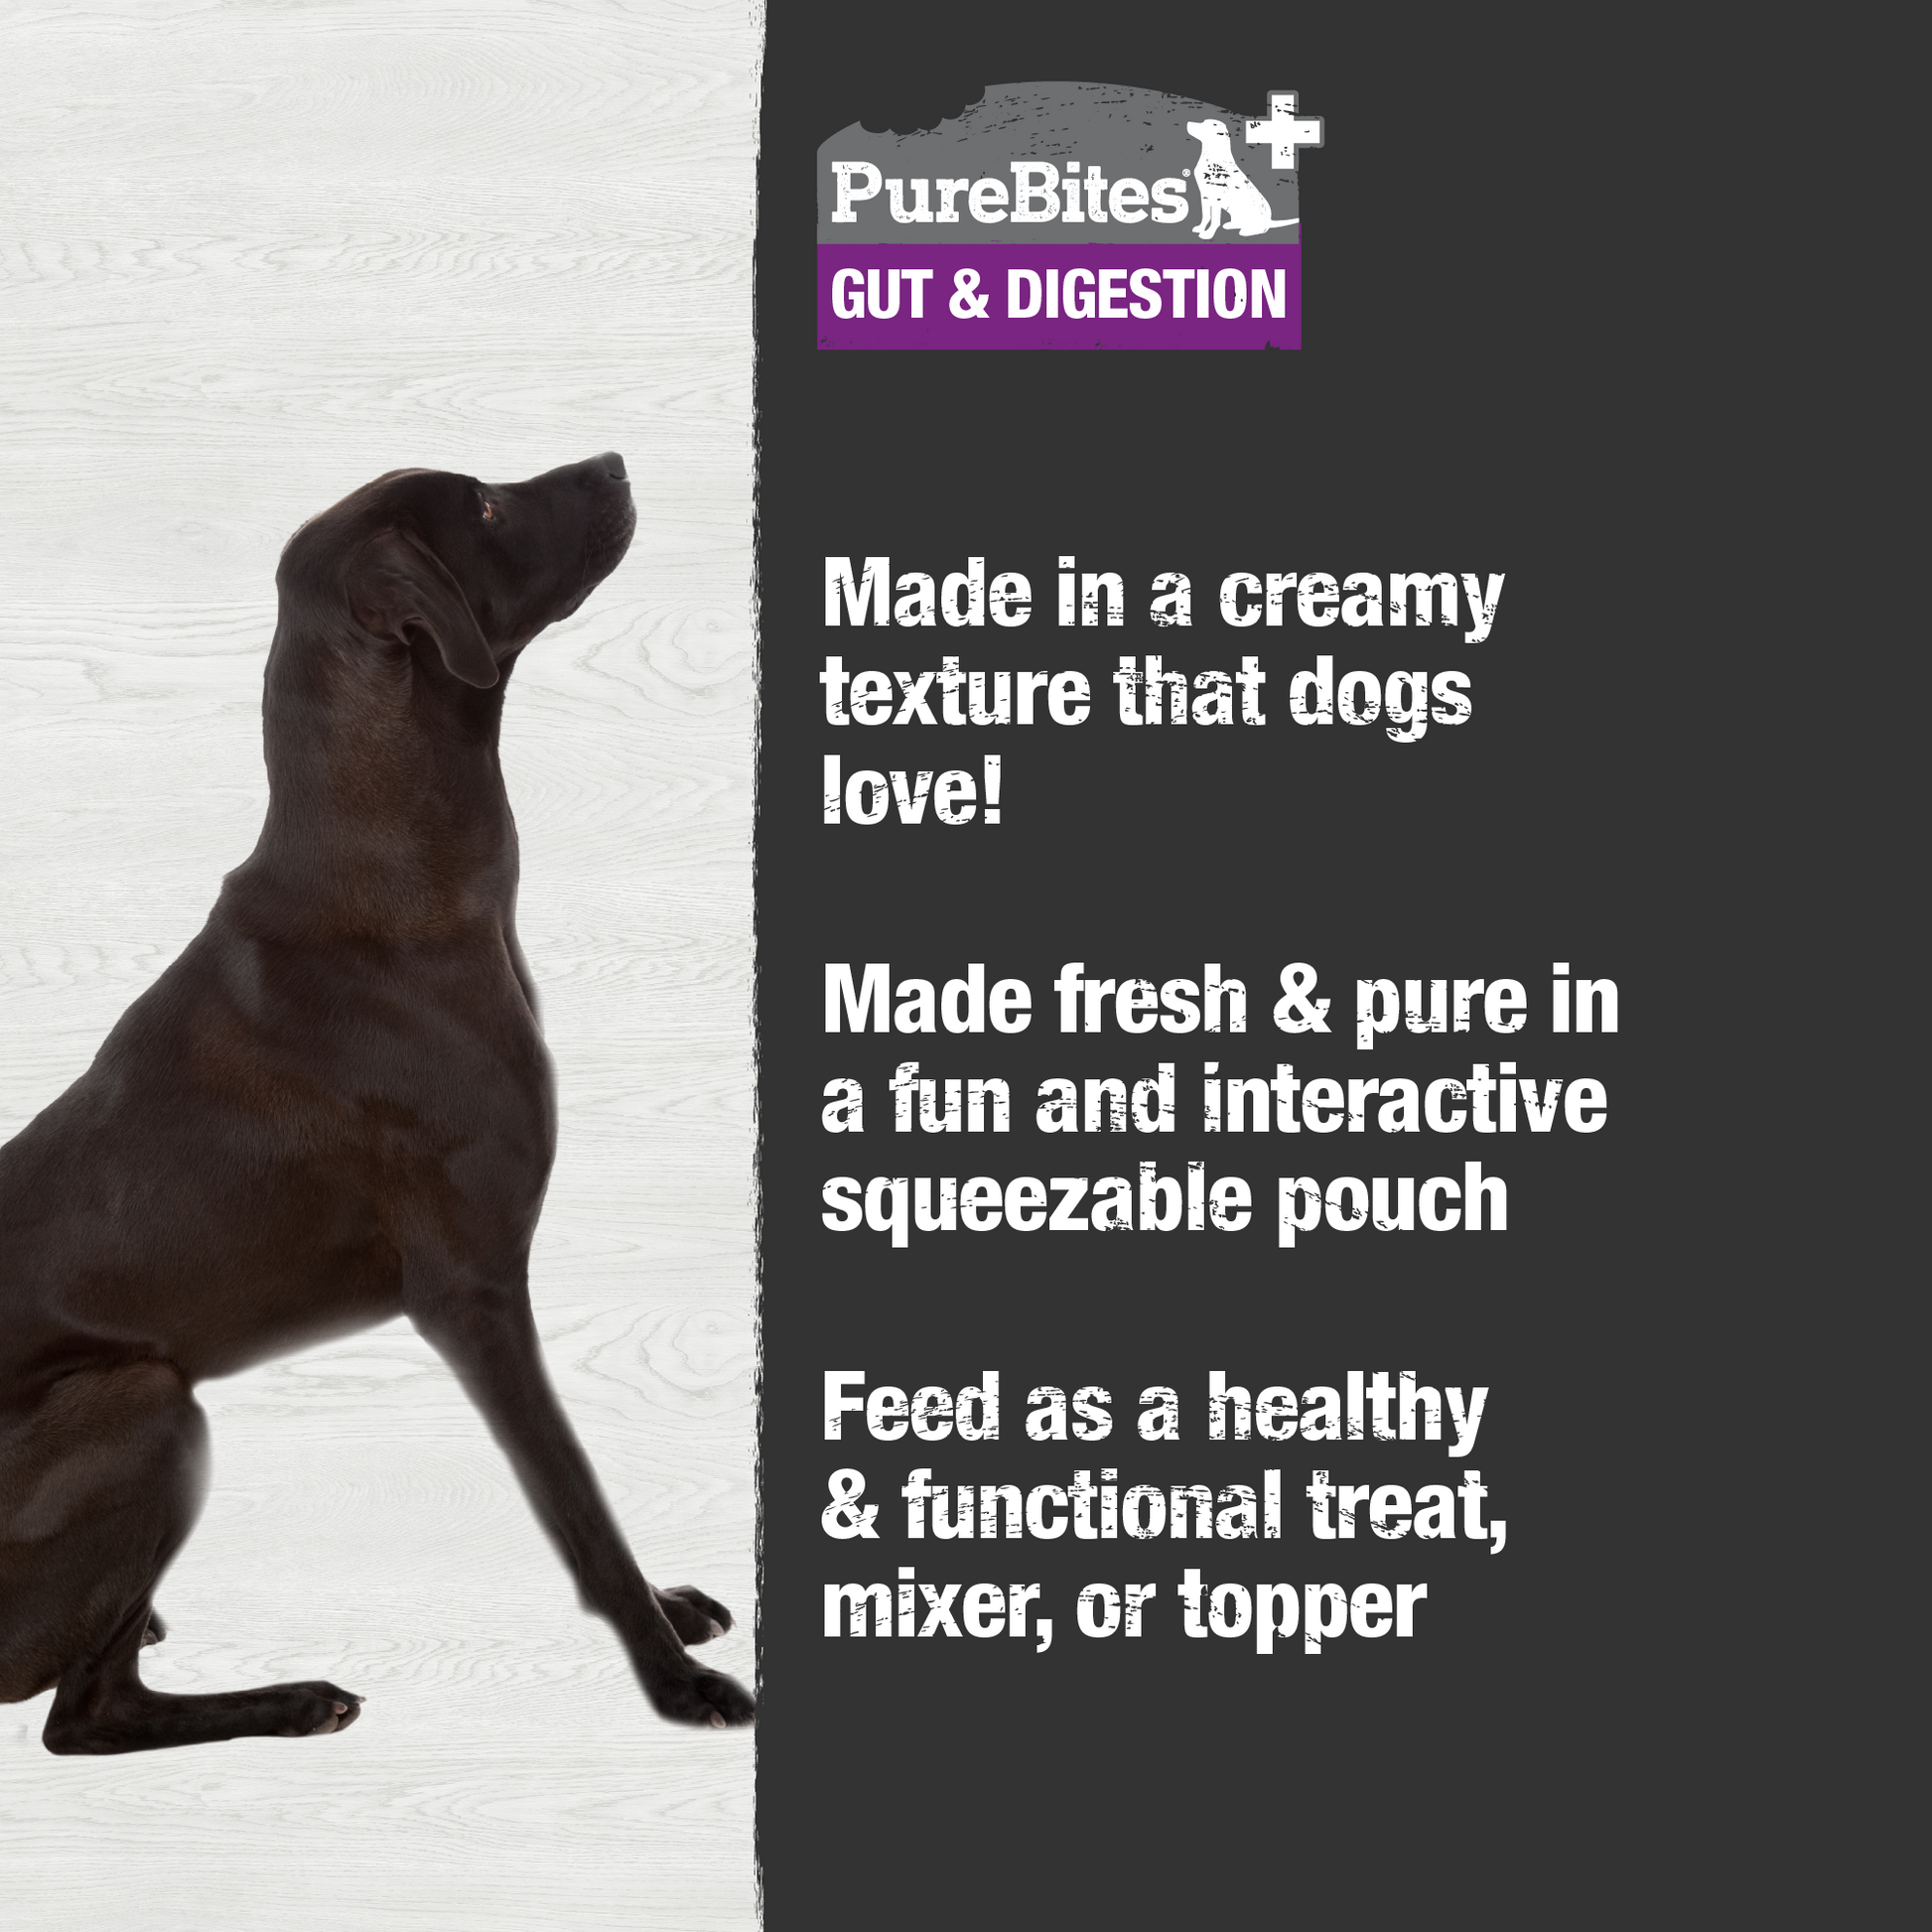 Made fresh & pure in a creamy texture and in a fun and interactive squeezable pouch, locking in the taste dogs crave and superior nutrition that pet parents love